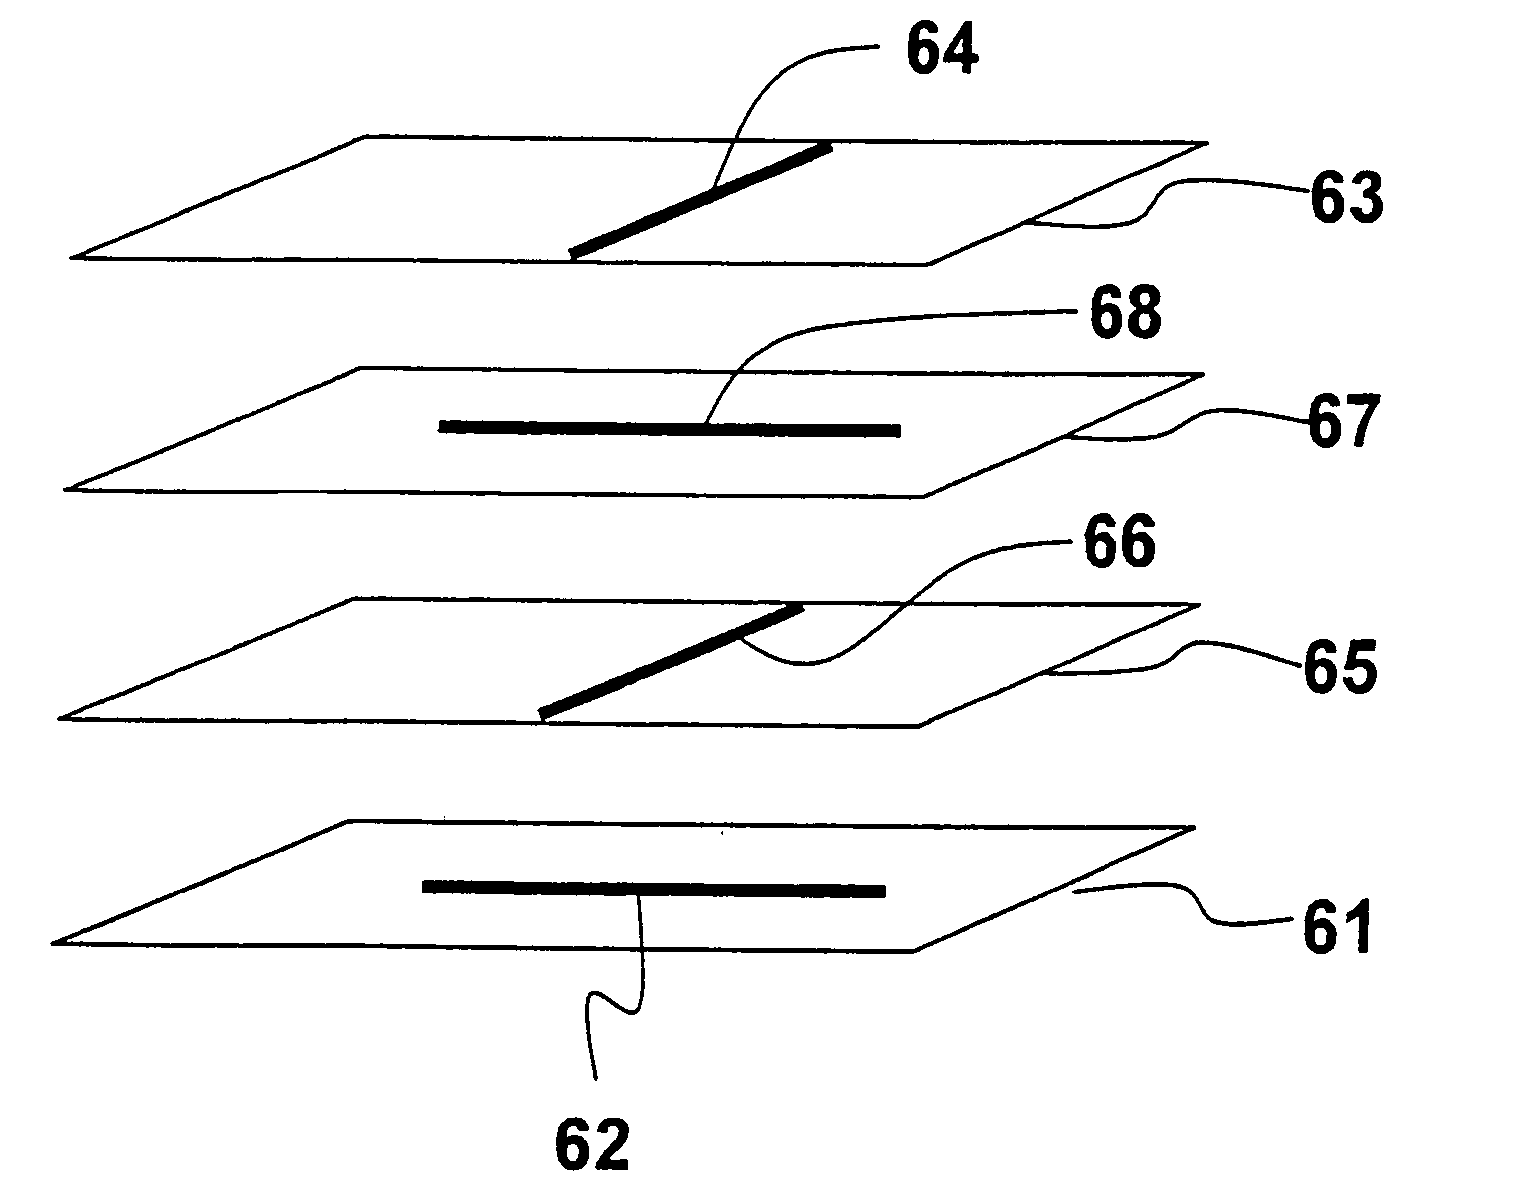 Multi-film compensated liquid crystal display with initial homogeneous alignment